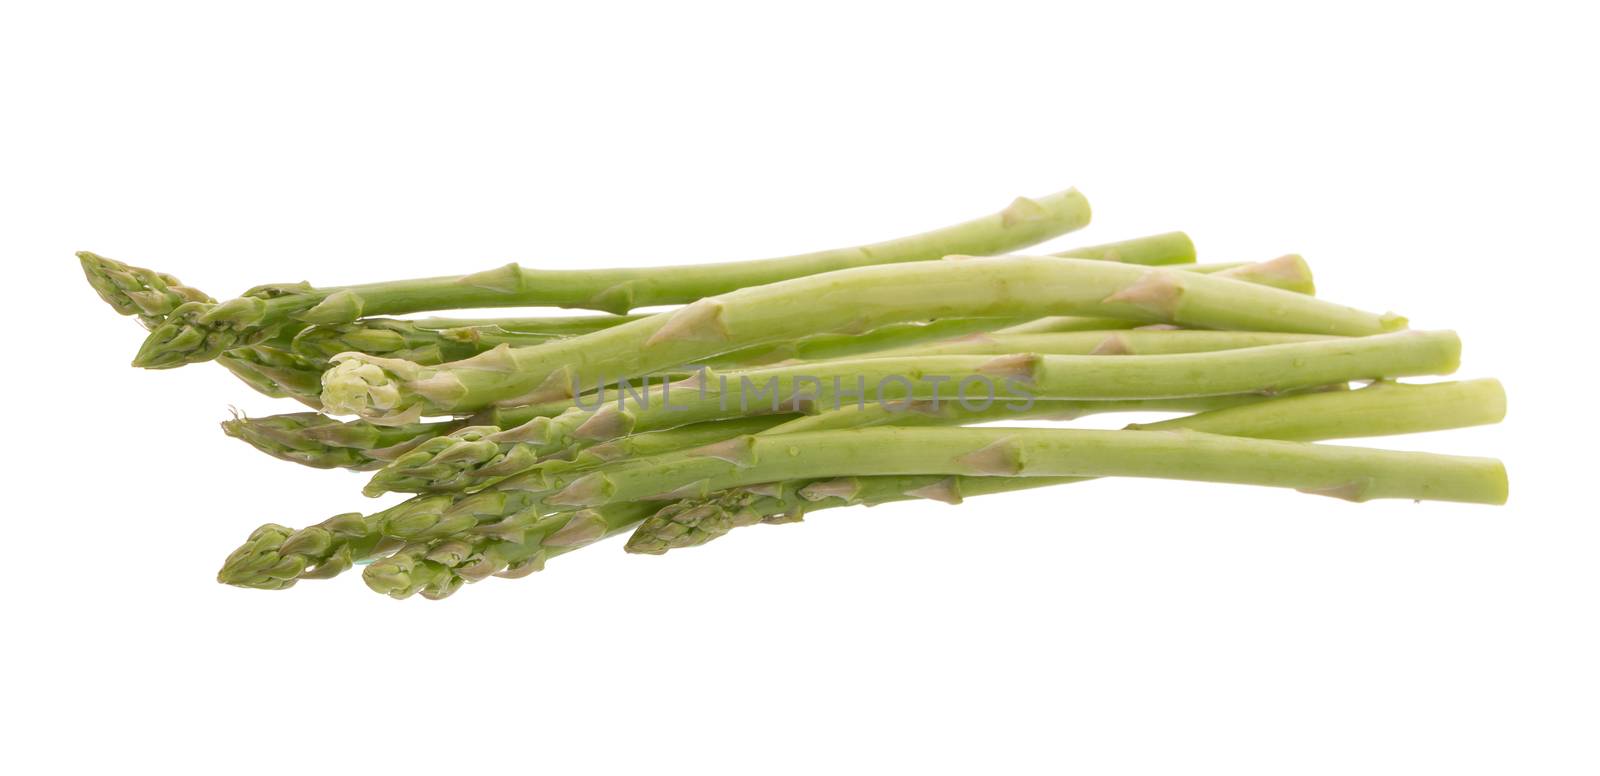 Bunch of green asparagus isolated on white background by kaiskynet